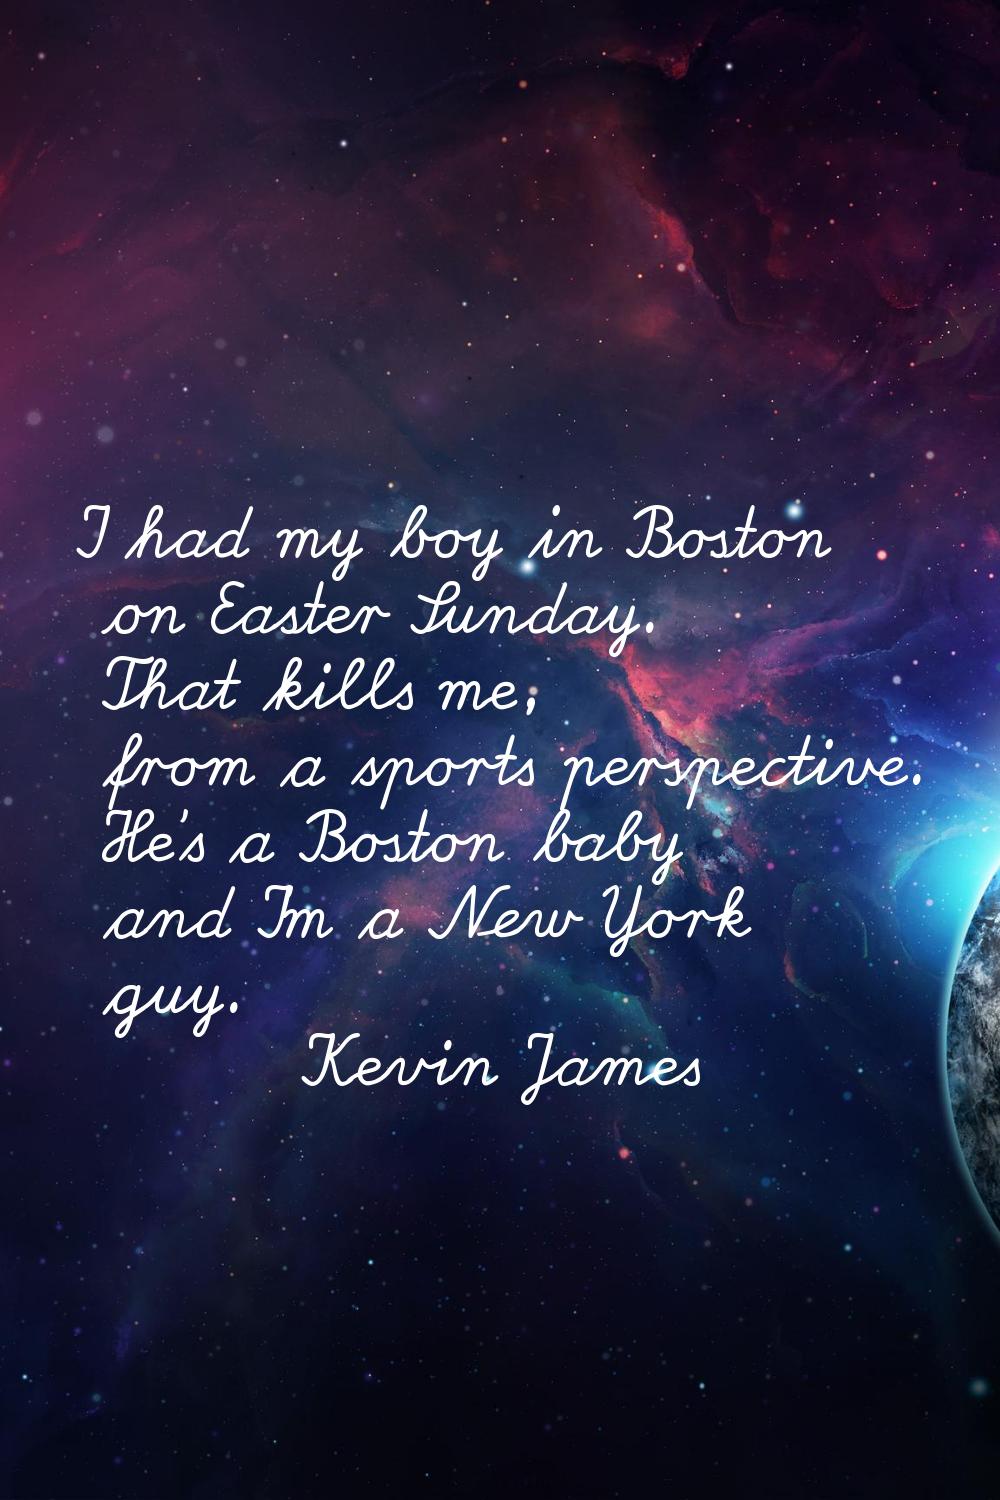 I had my boy in Boston on Easter Sunday. That kills me, from a sports perspective. He's a Boston ba